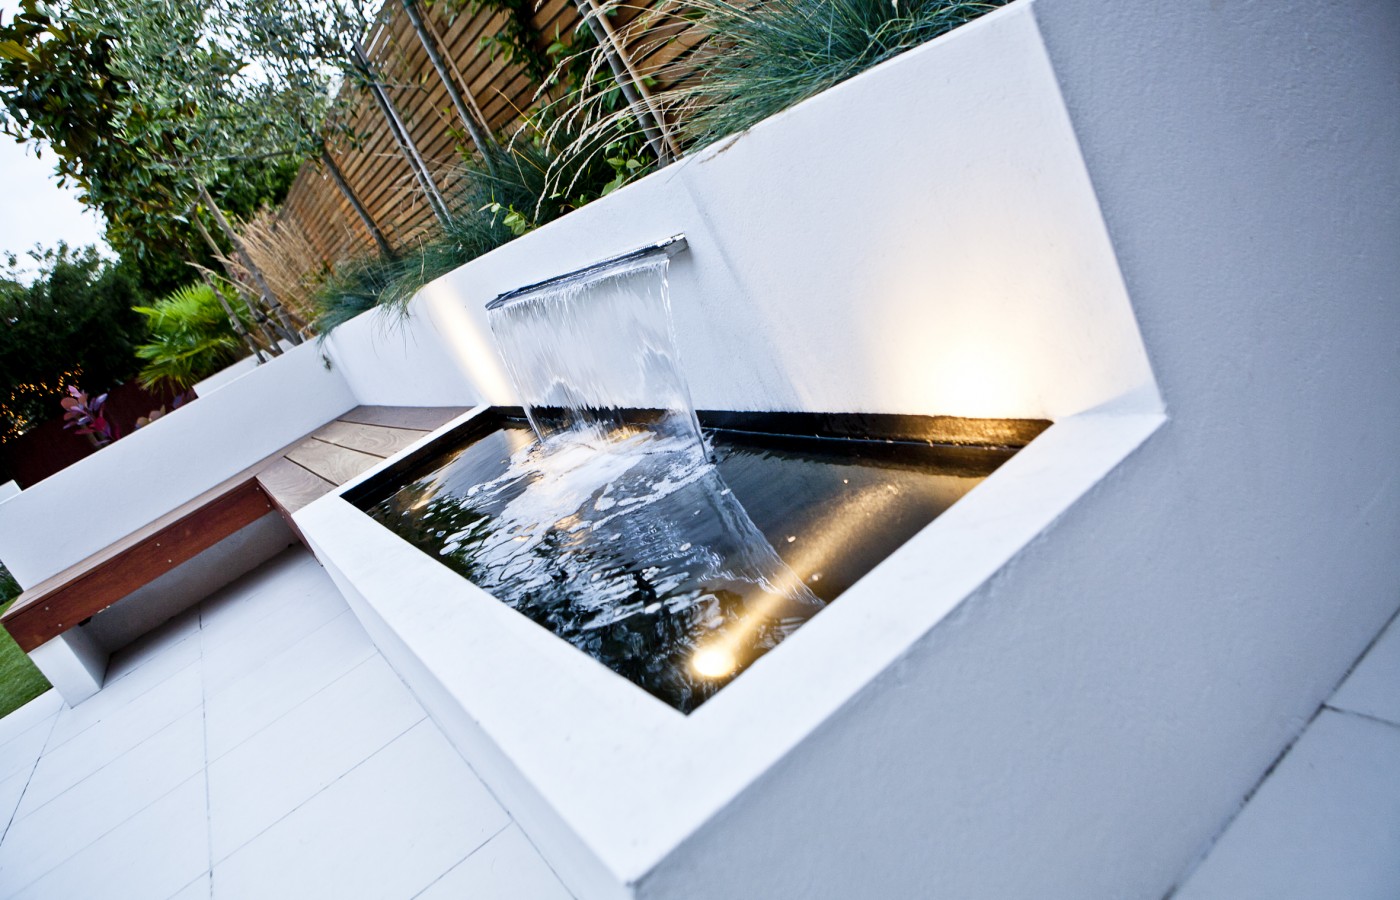 Modern water feature in the white patio section of the garden